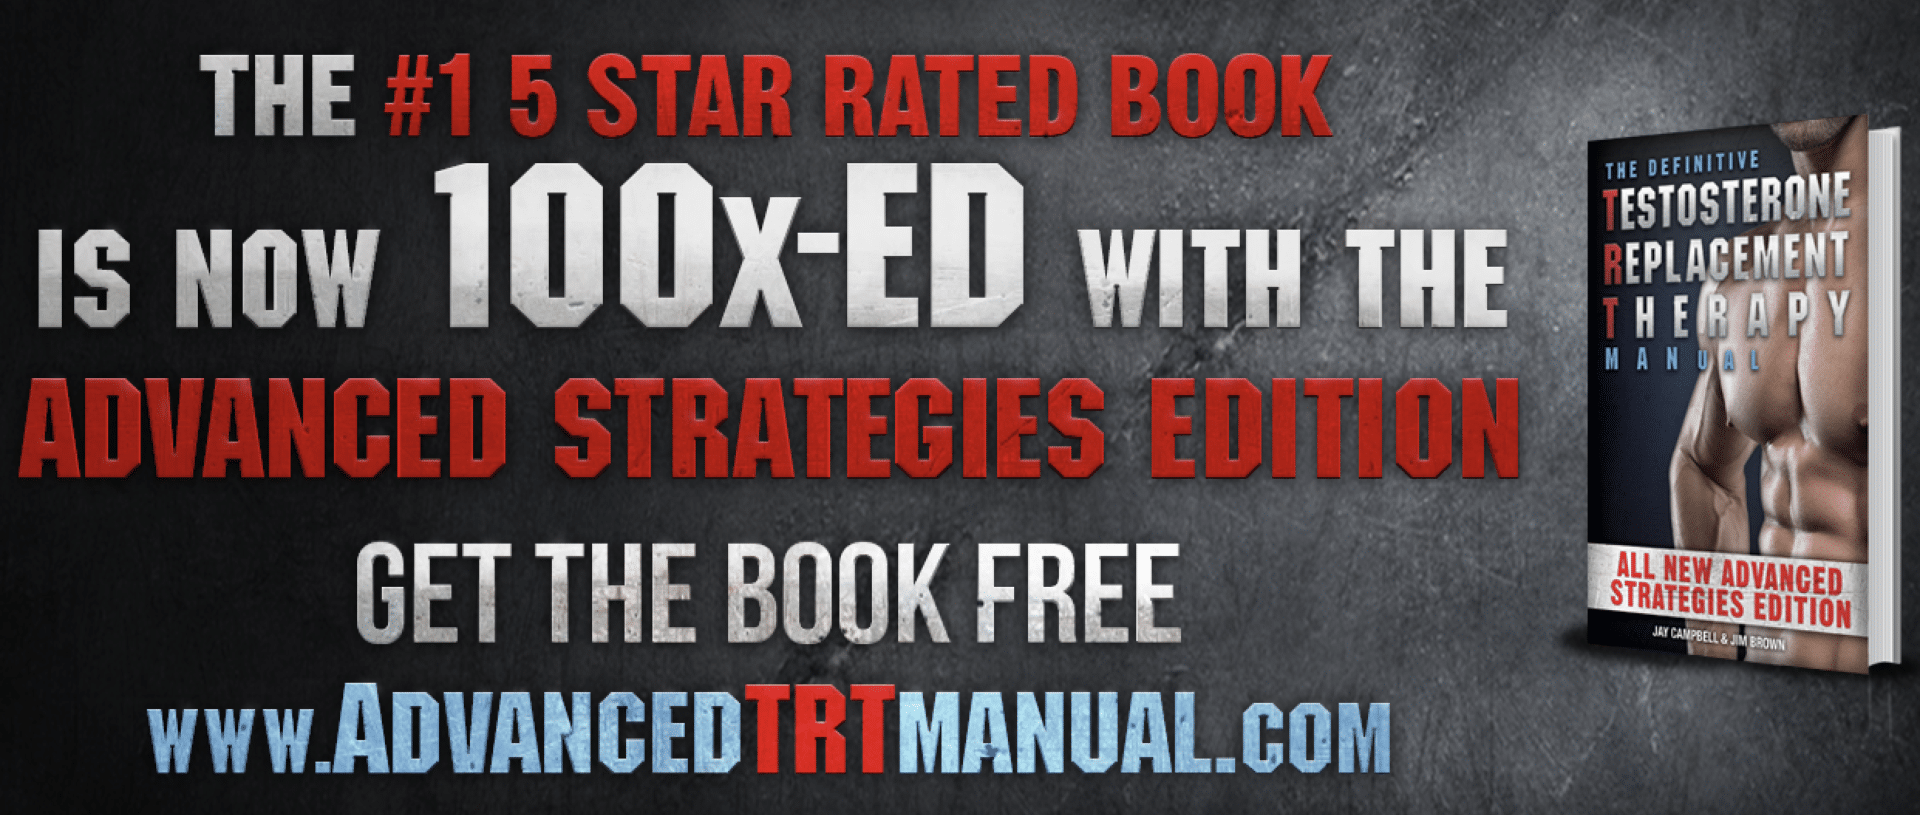 TRT-MANual-AS-Edition-FREE